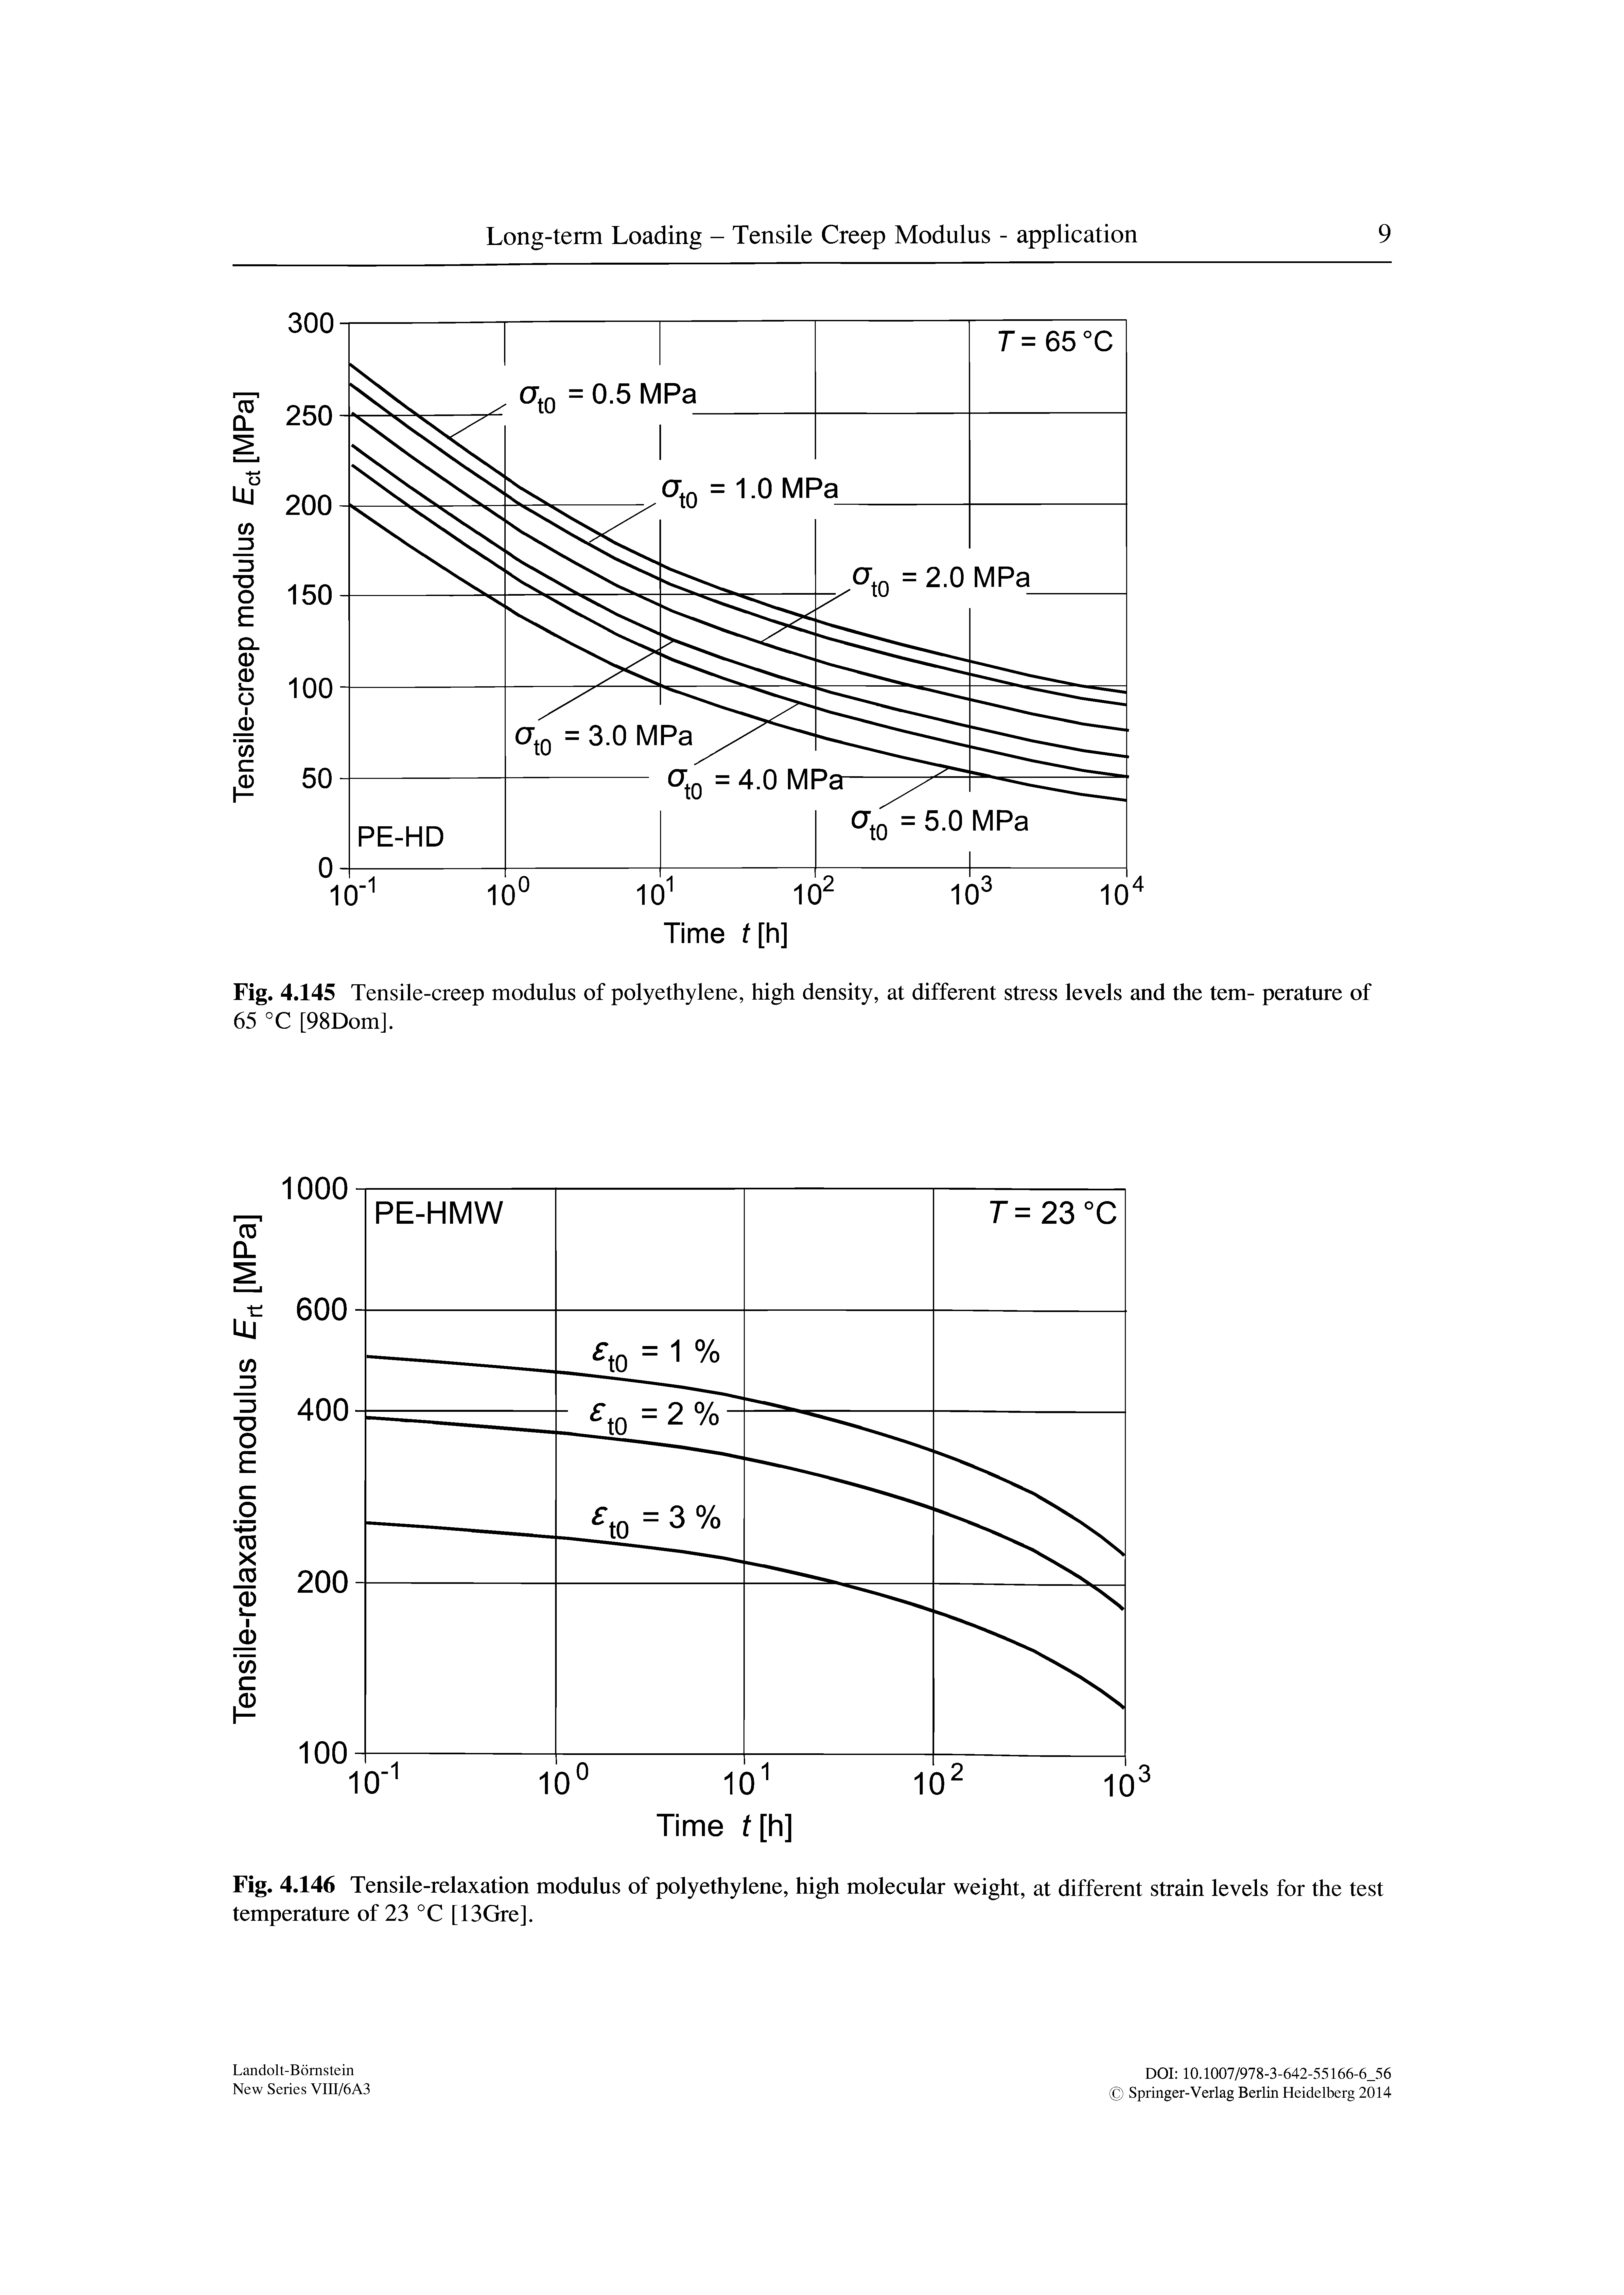 Fig. 4.146 Tensile-relaxation modulus of polyethylene, high molecular weight, at different strain levels for the test temperature of 23 °C [13Gre].